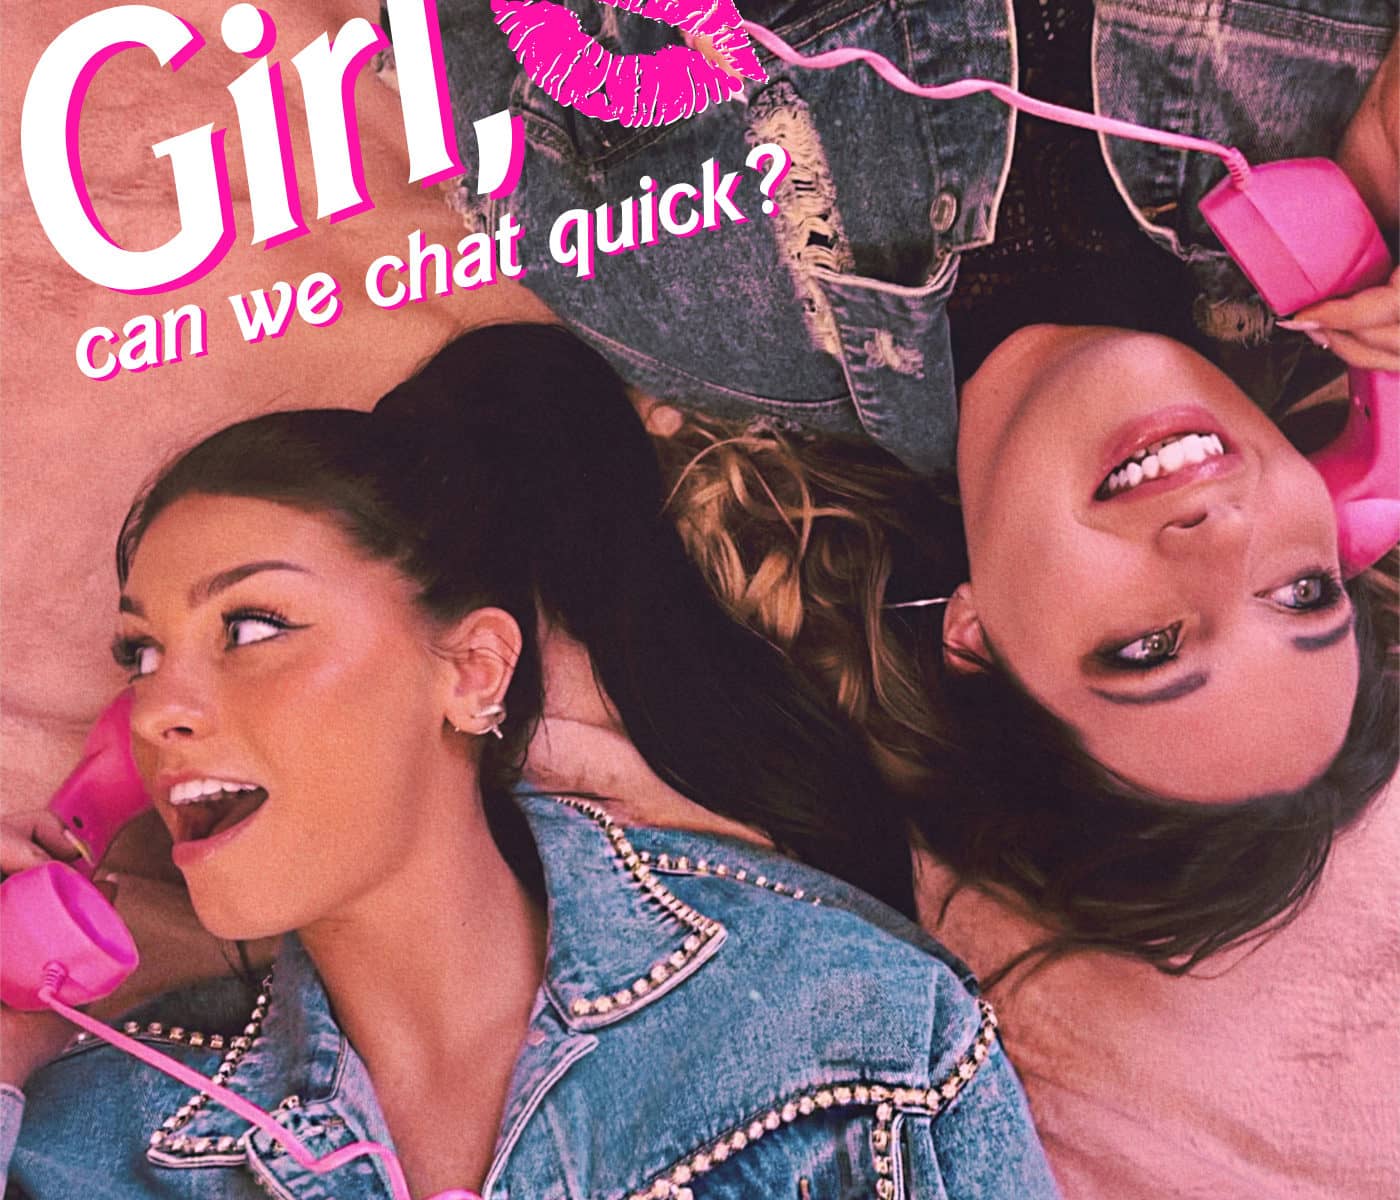 girl_can_we_chat_quick_podcast-24